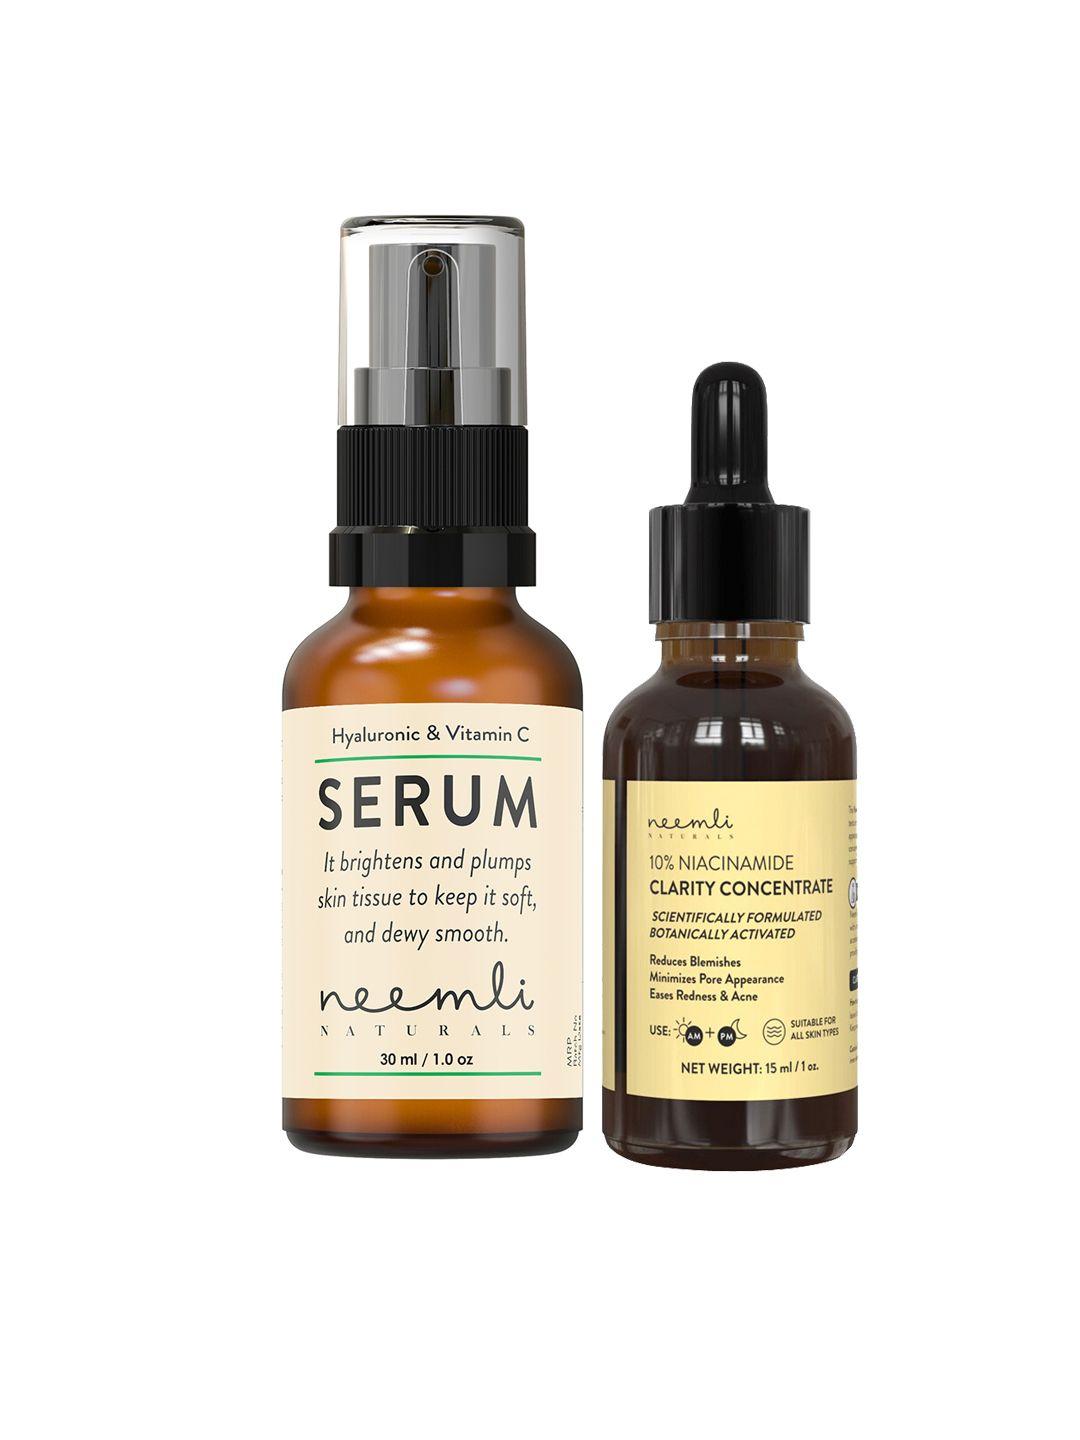 neemli naturals hyaluronic & vitamin c - 10% niacinamide clarity concentrate face serum